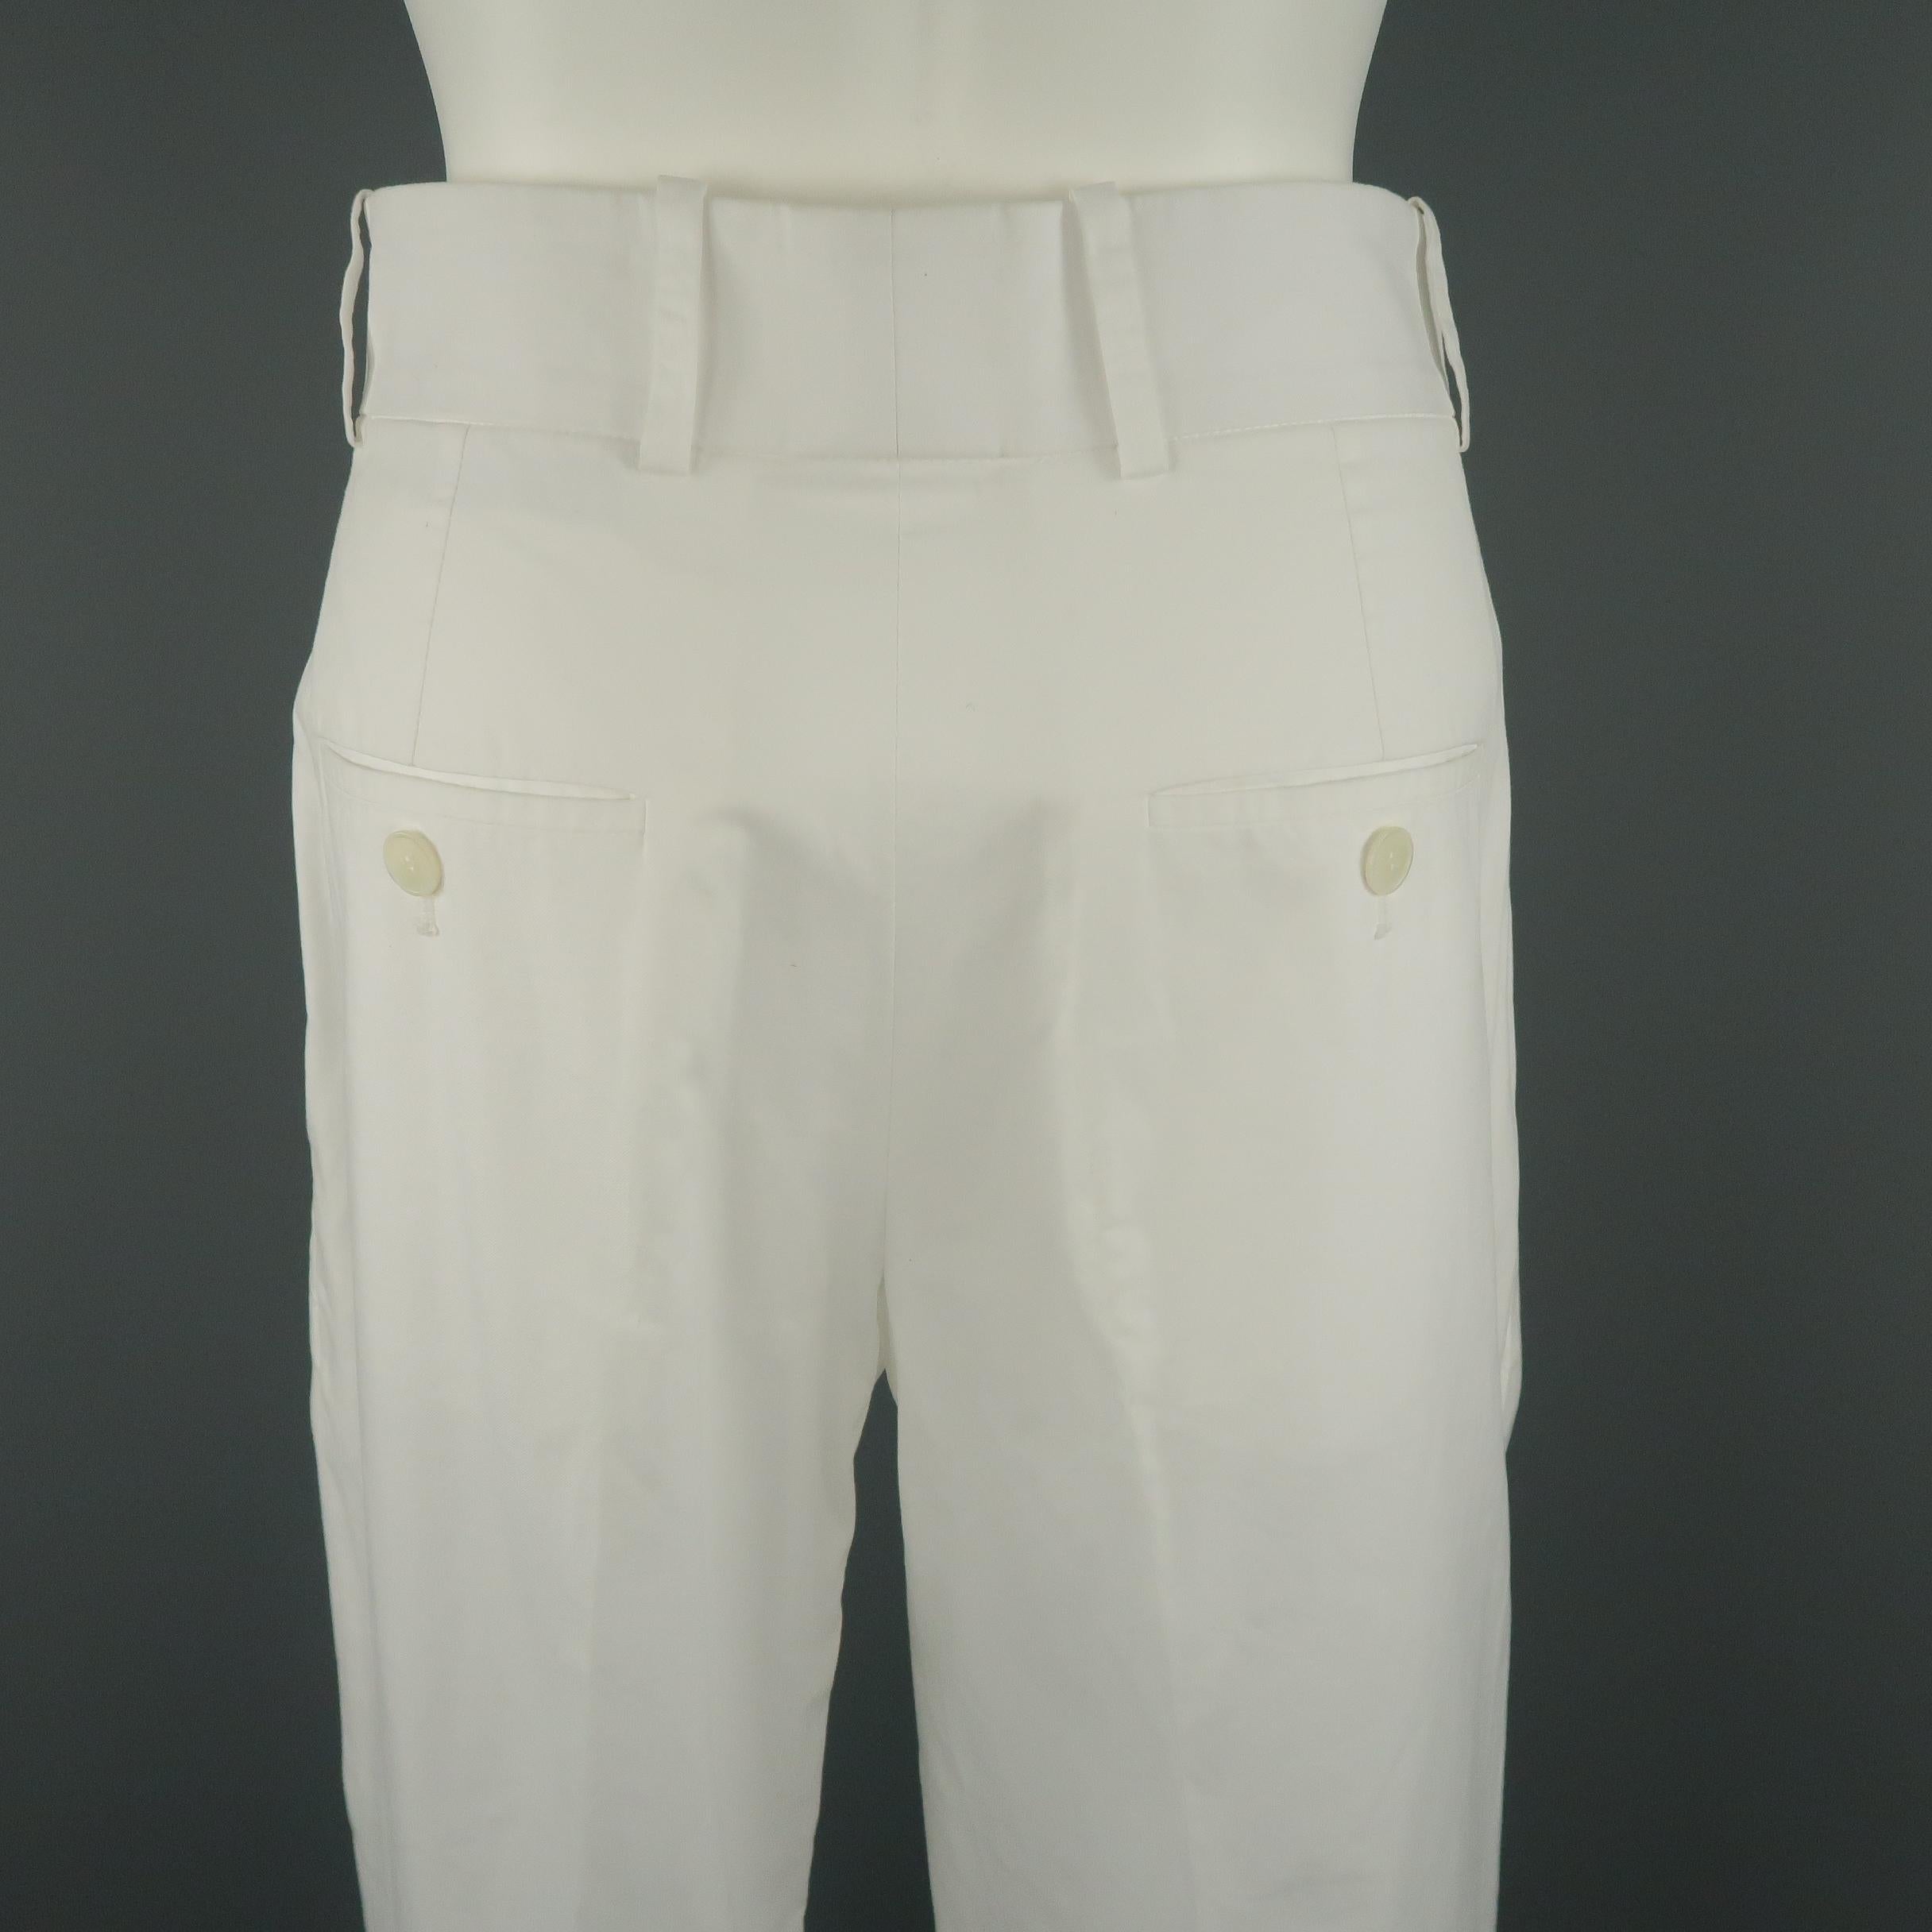 Vintage YVES SAINT LAURENT RIVE GAUCHE pants come in white cotton with a high rise, single pleat front, and wide leg with cuffed hem. Made in France.
 
Very Good Pre-Owned Condition.
Marked: FR 36
 
Measurements:
 
Waist: 29 in.
Rise: 11.5